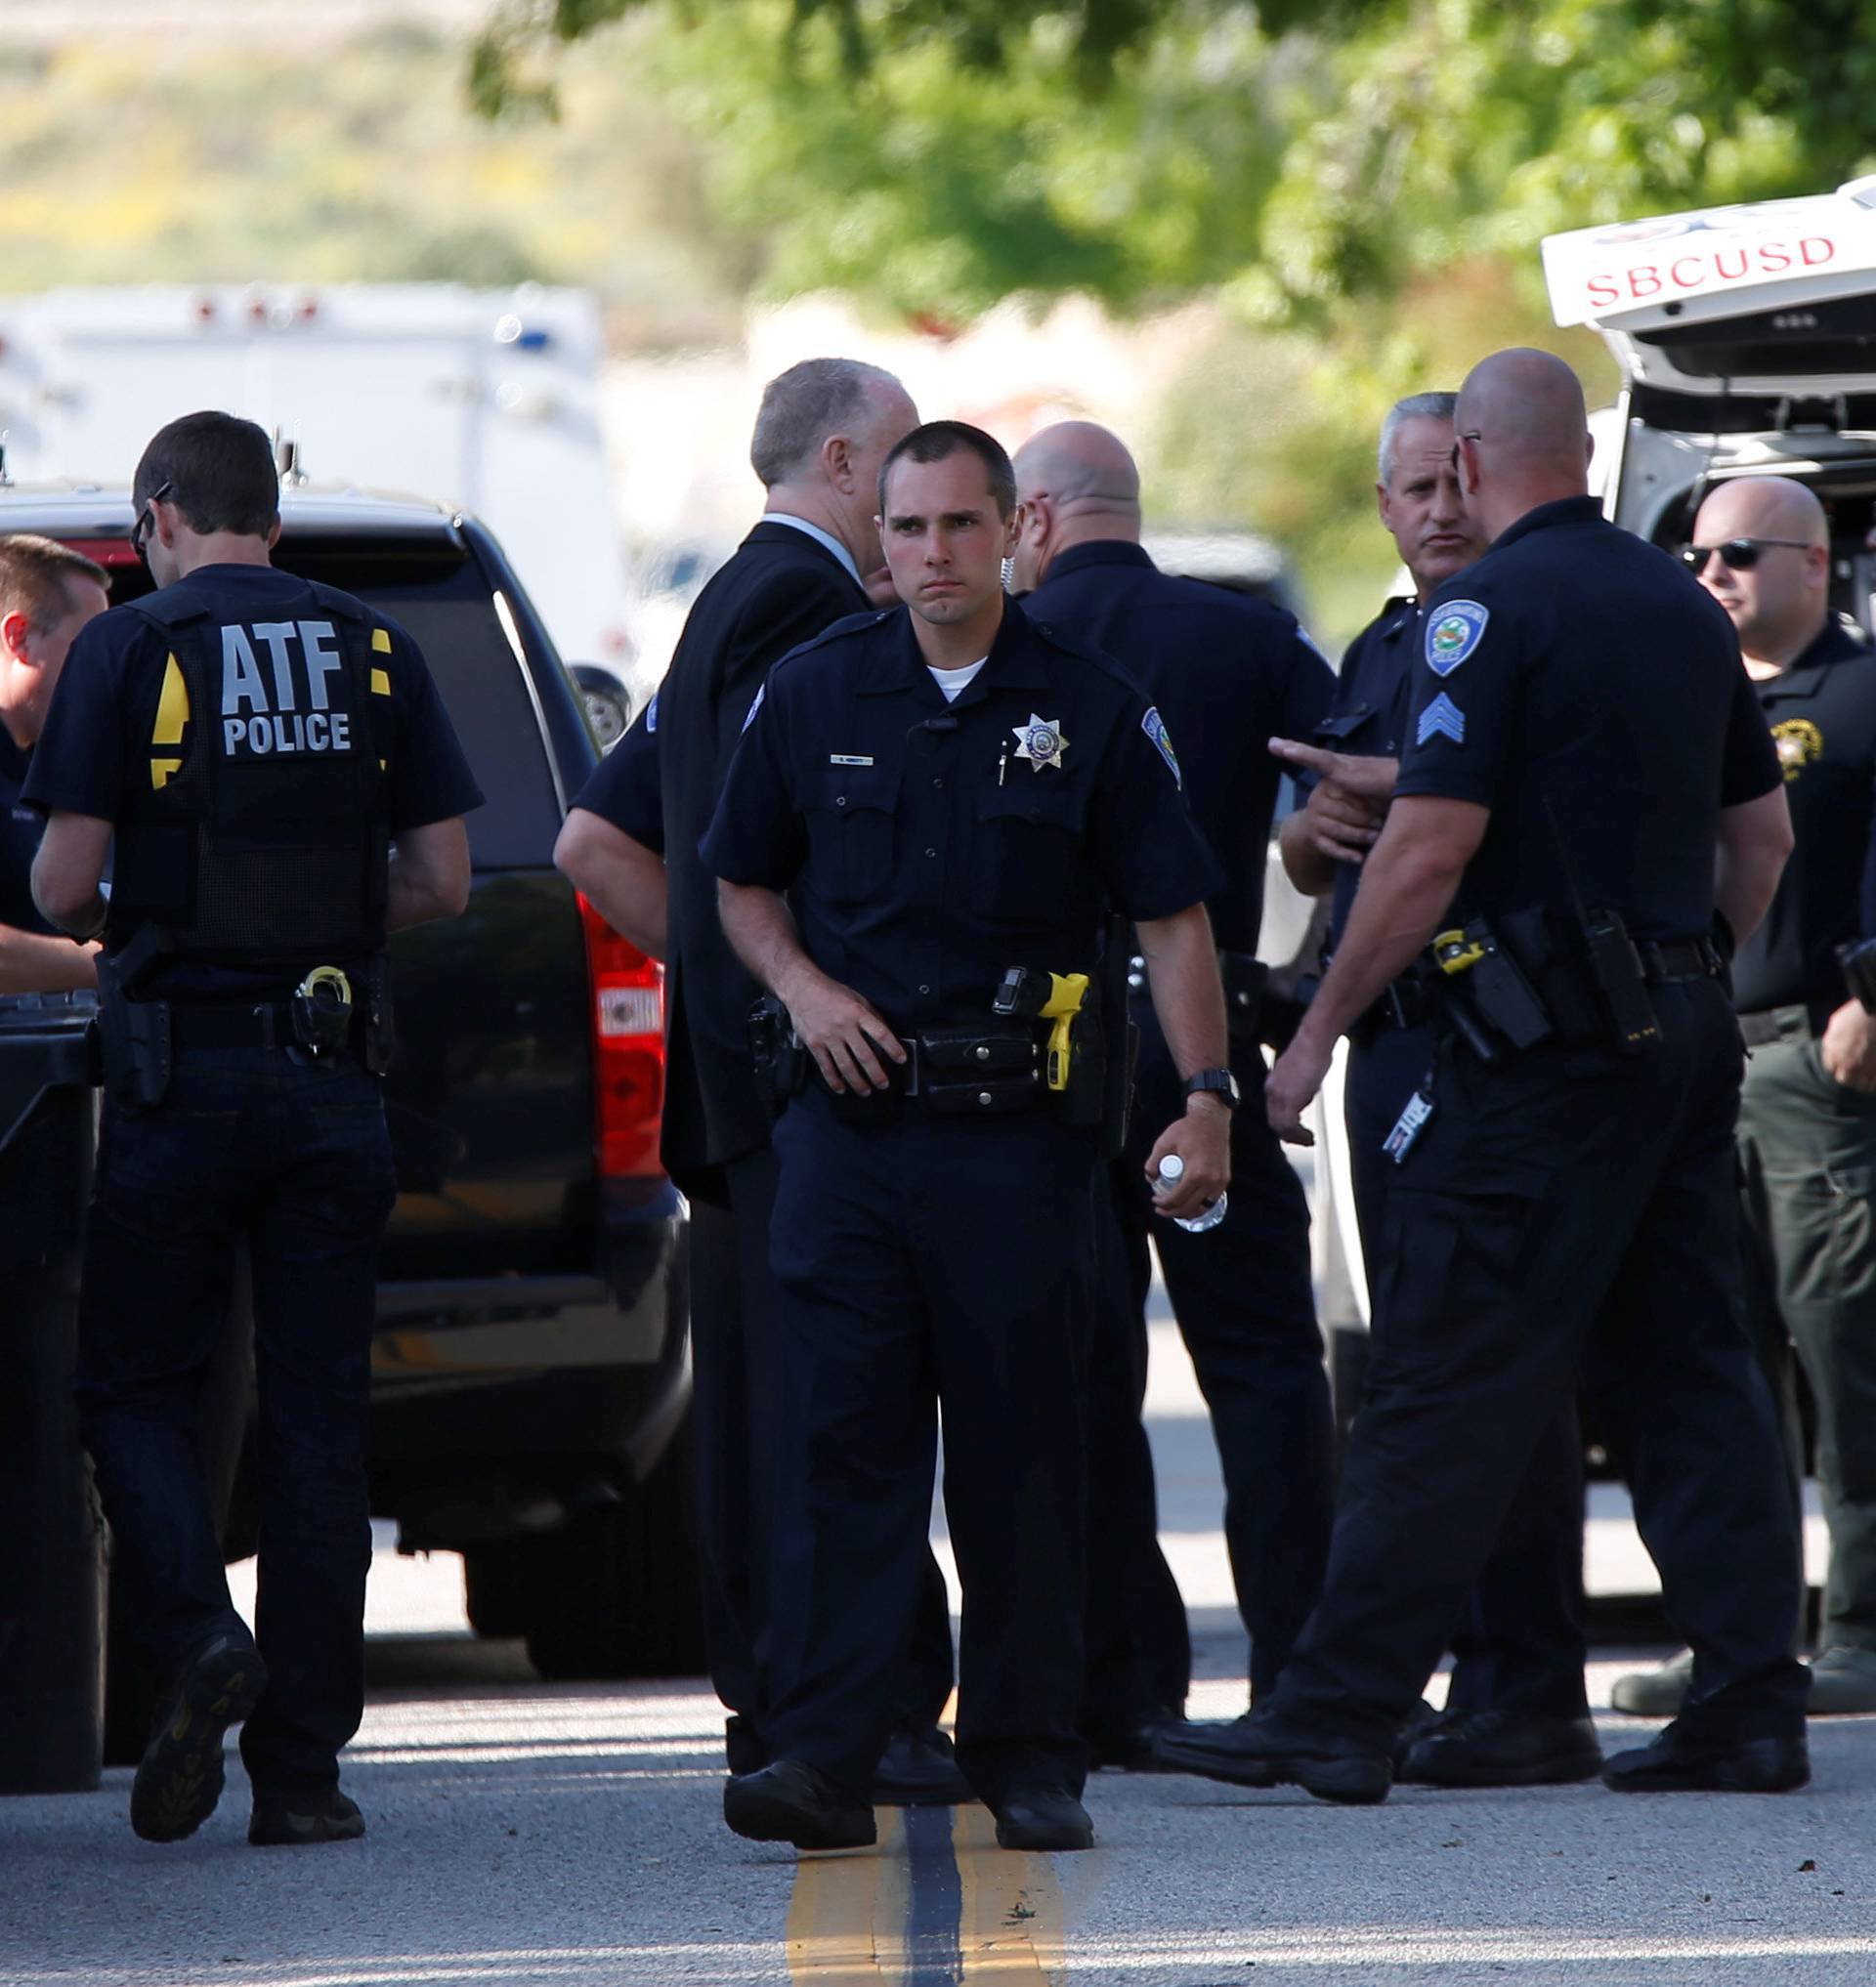 Police officers are pictured after a shooting at North Park Elementary School in San Bernardino